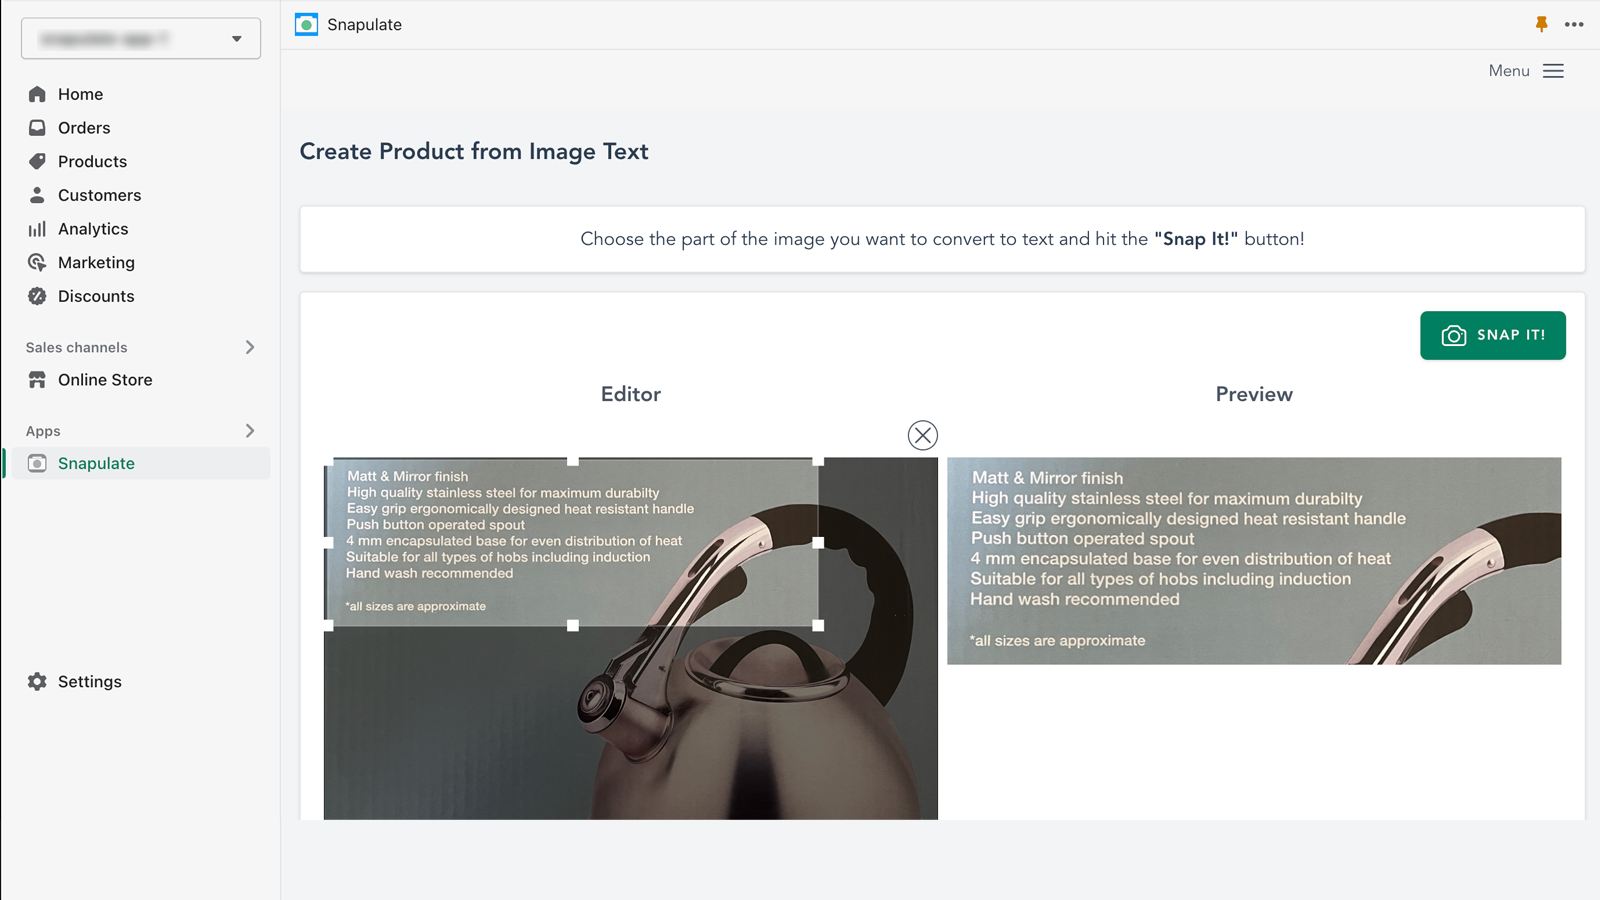 Snapulate's create product from image page